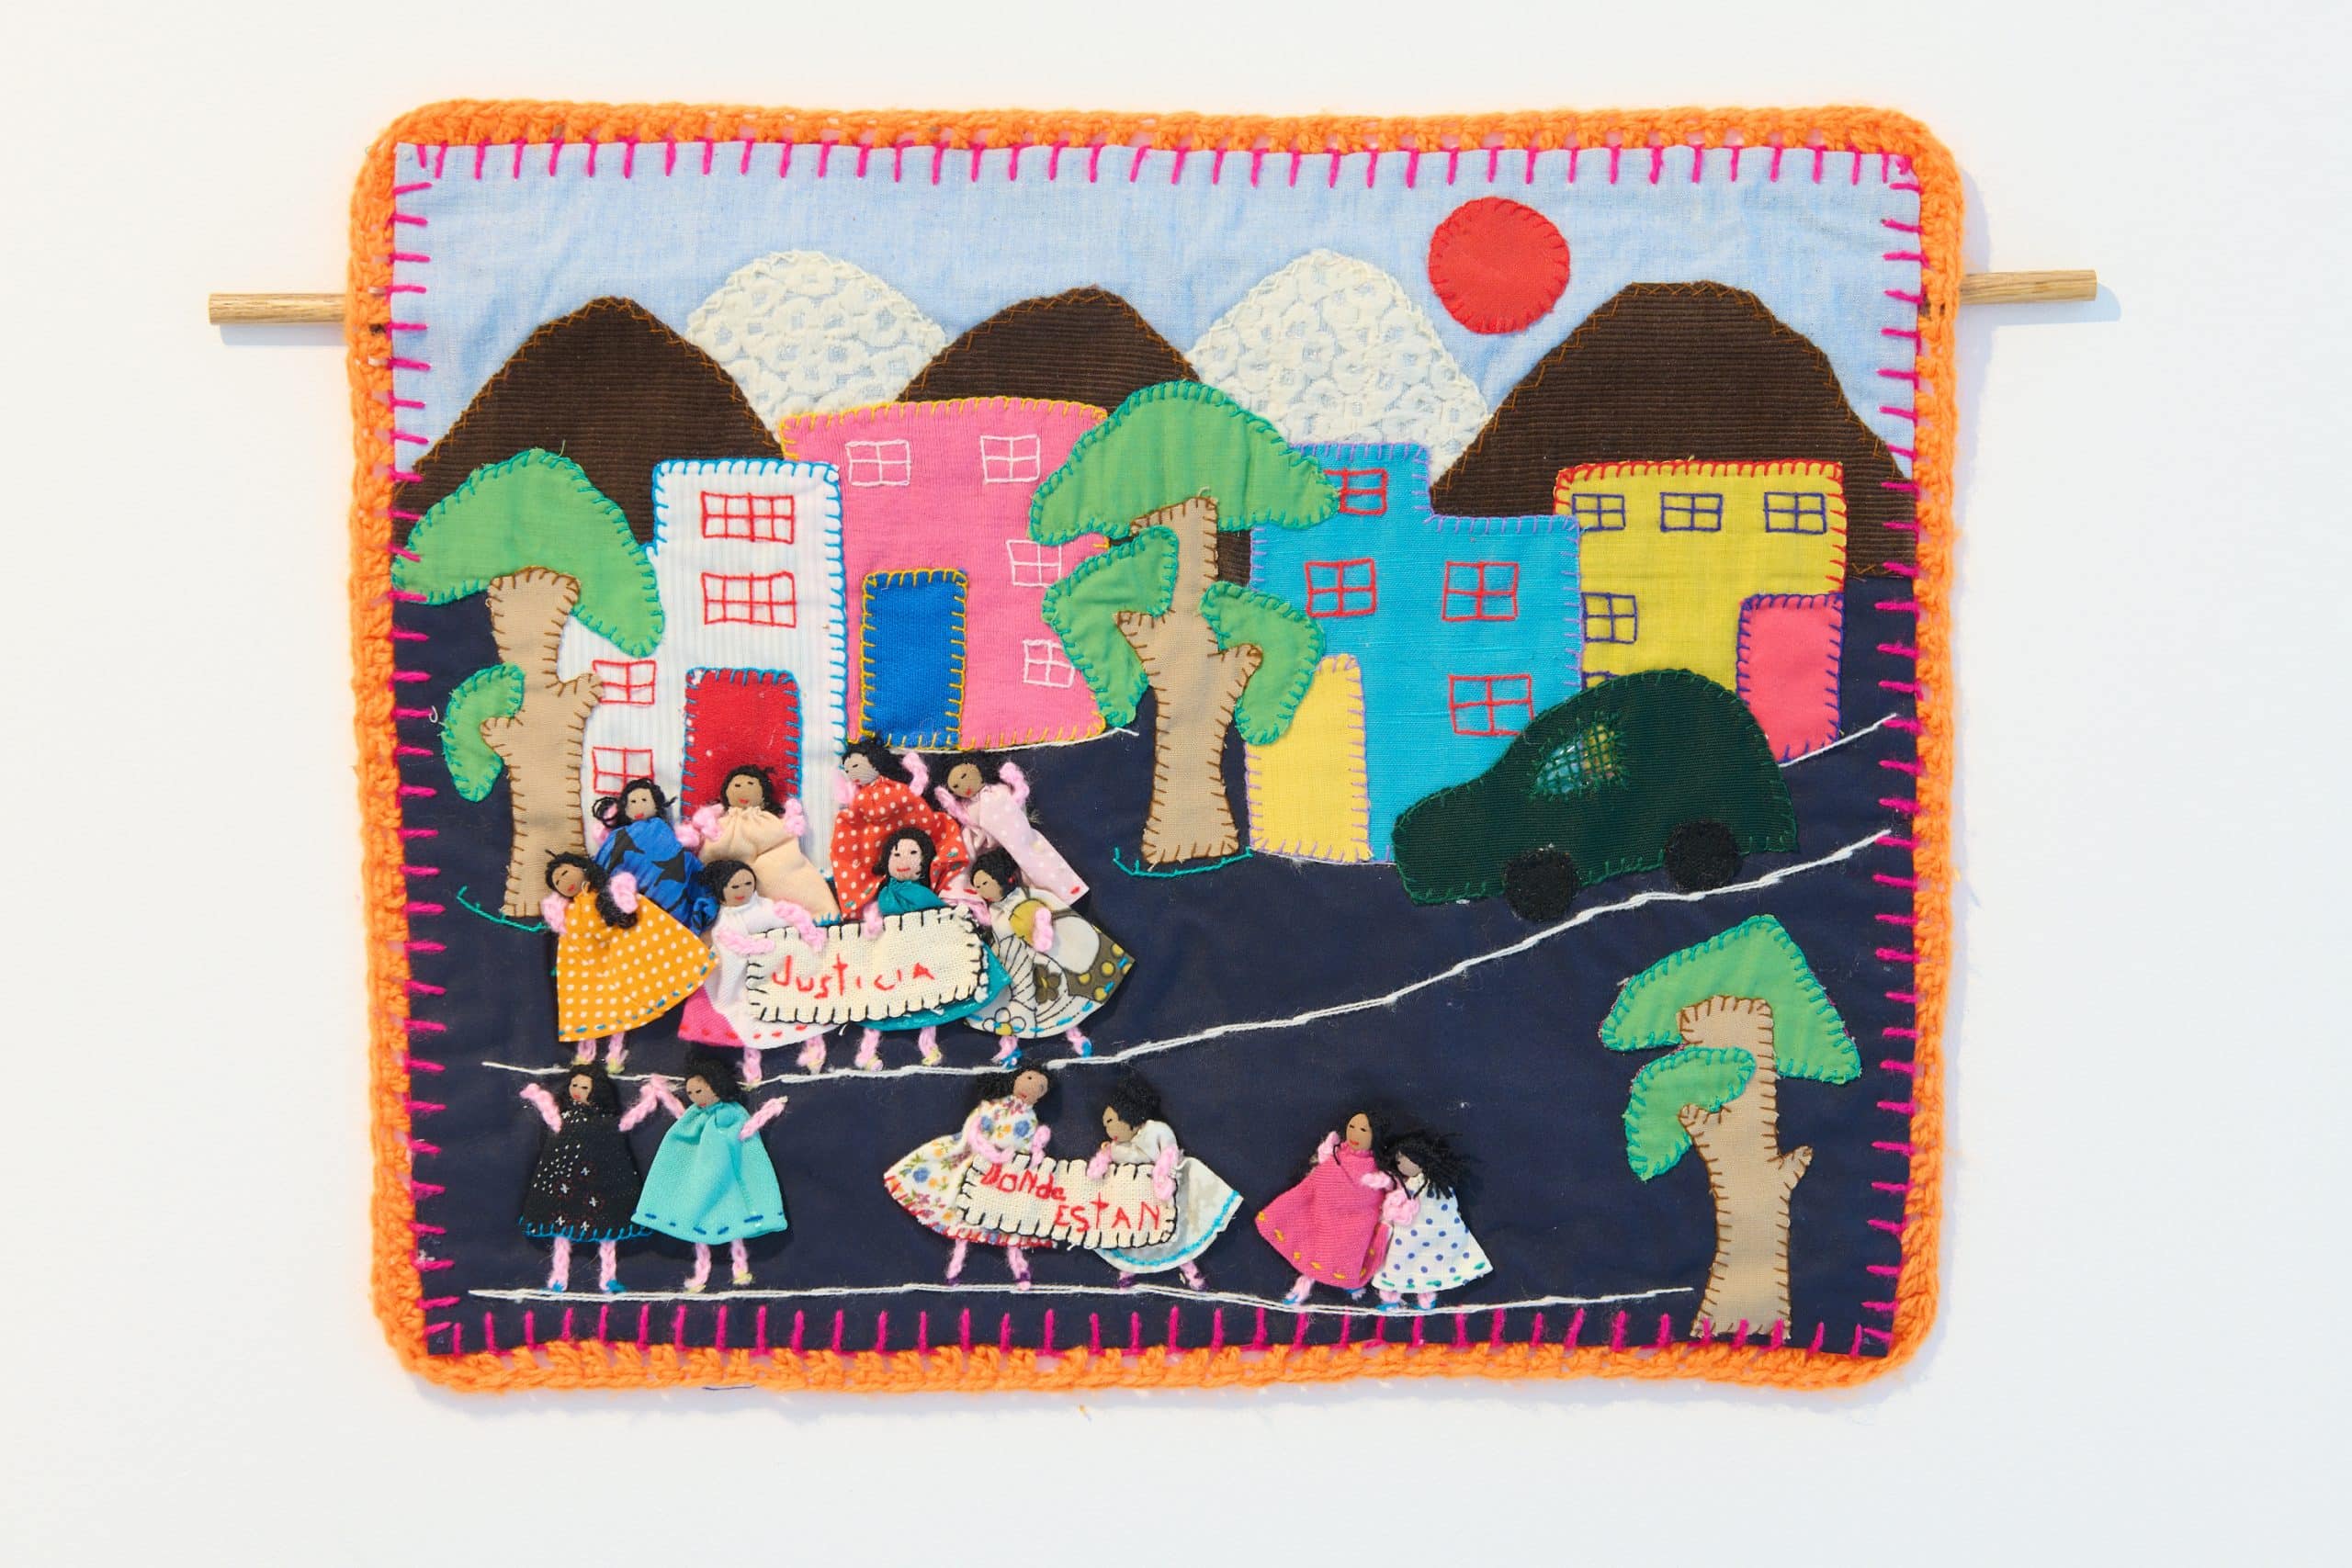 An arpillera depicting a mountainous town with colourful buildings behind people protesting.